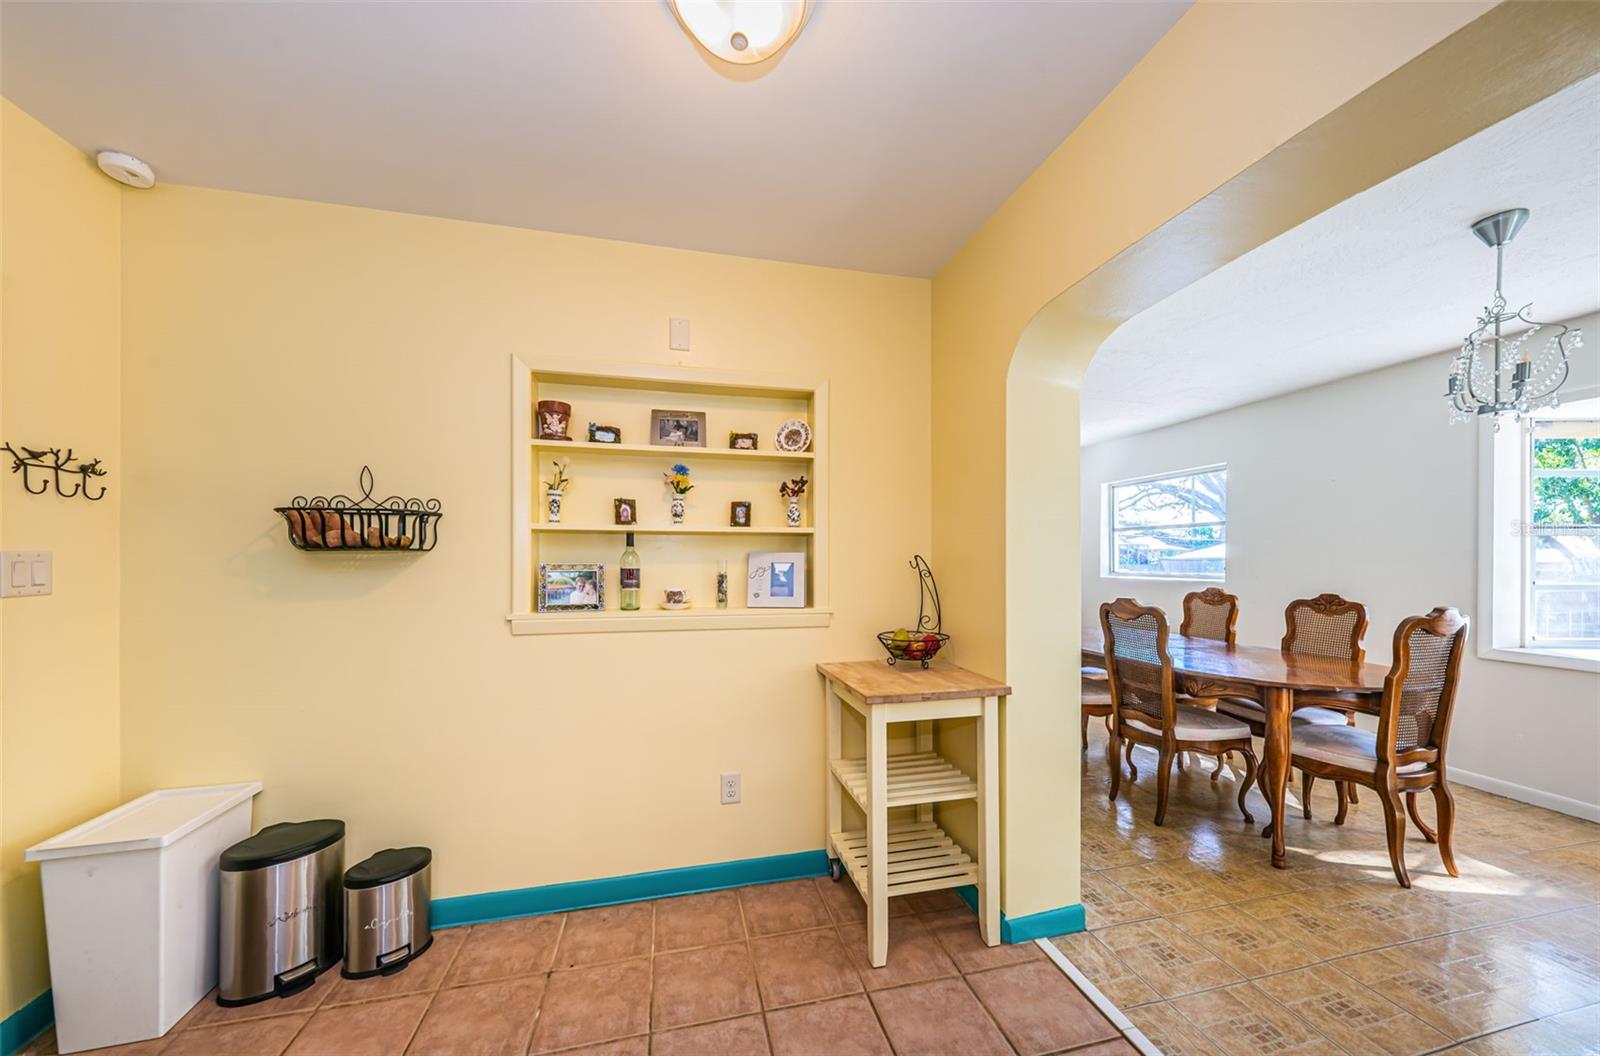 Kitchen has casual dining area and arched opening to formal dining room.